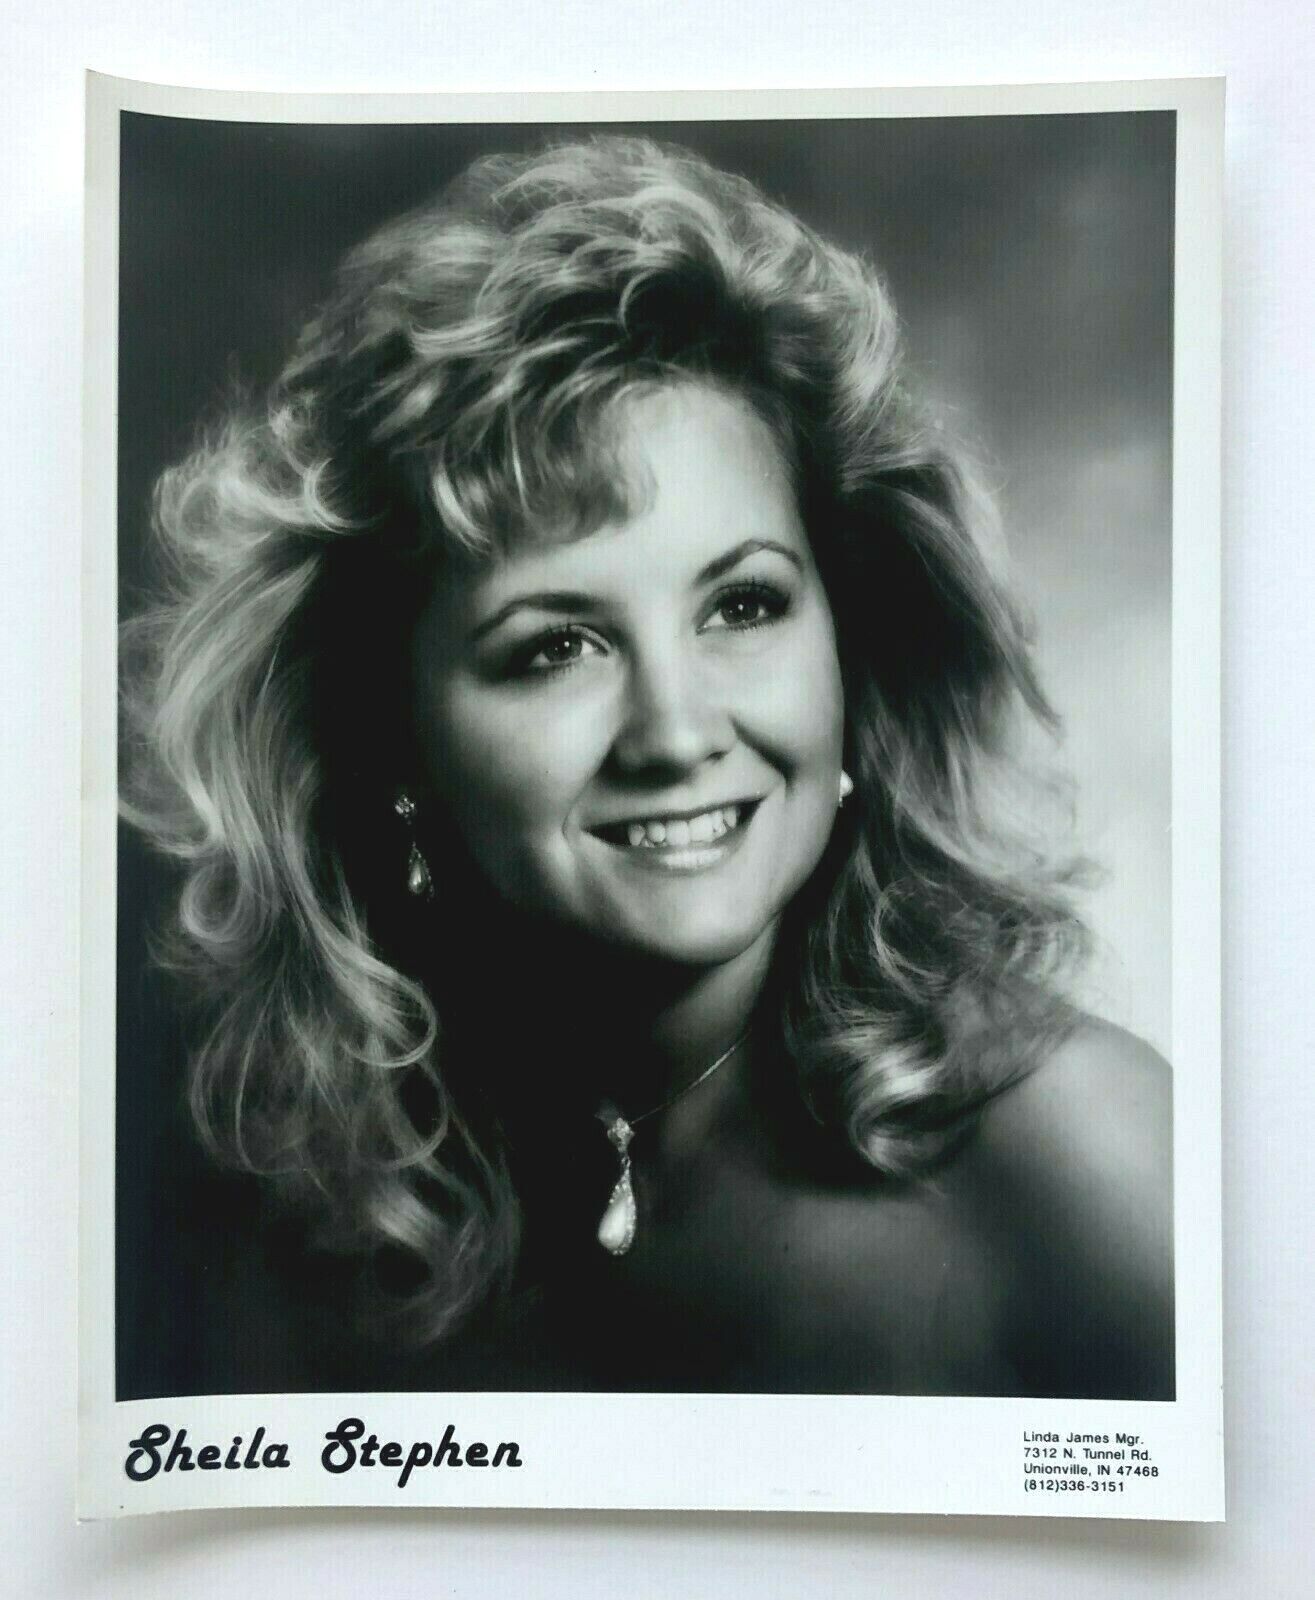 1980s Sheila Stephen Press Promo Photo Country Singer Songwriter Miss Indiana 